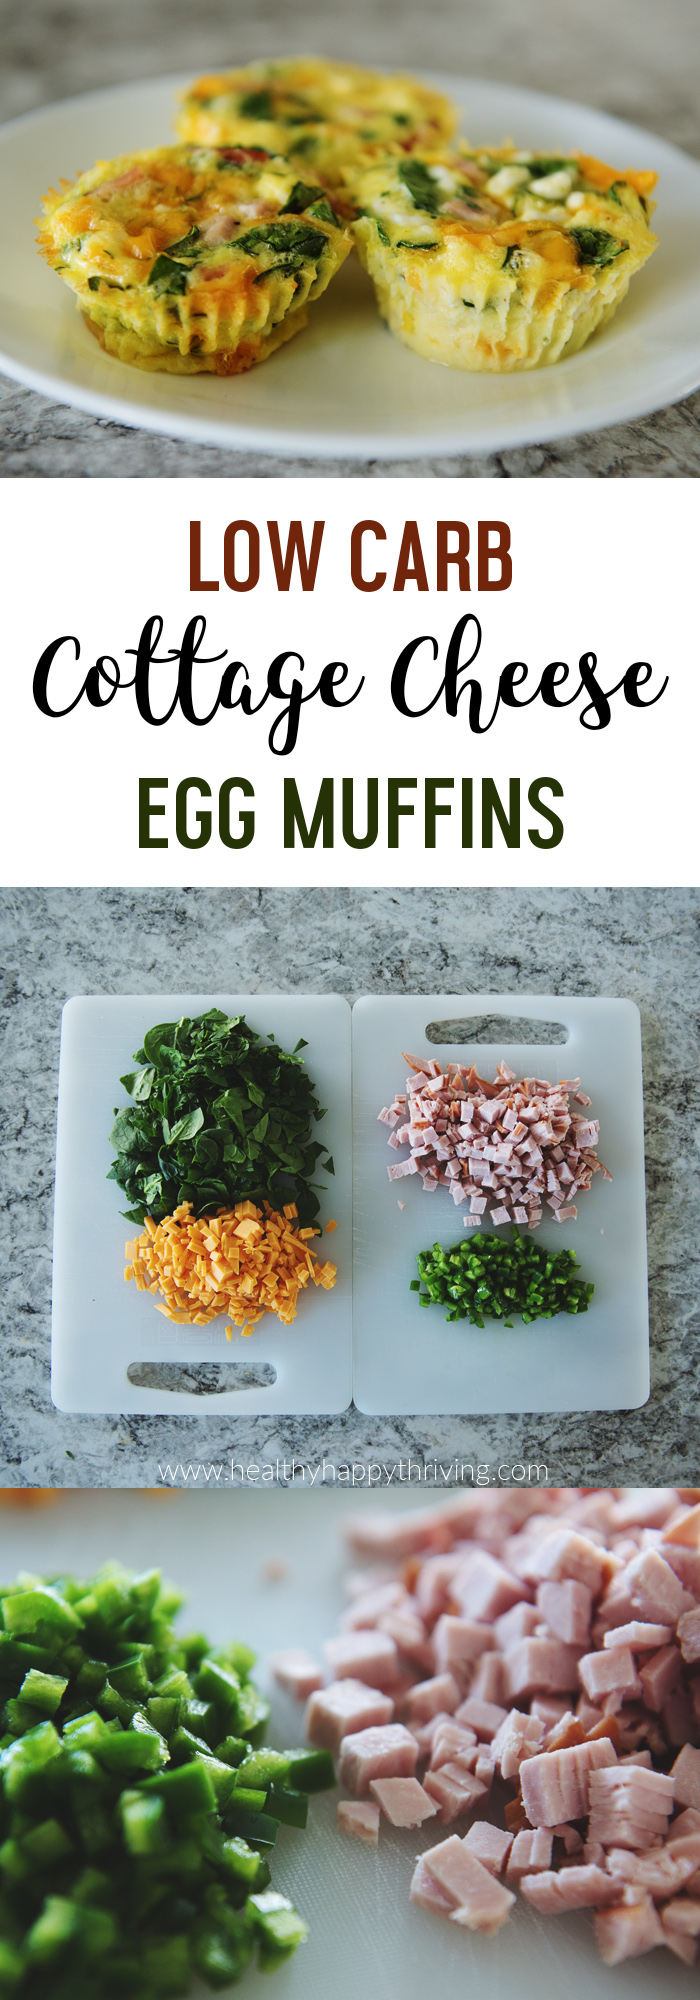 Low Carb Cottage Cheese Egg Muffins – Healthy Happy ThrivingHealthy ...